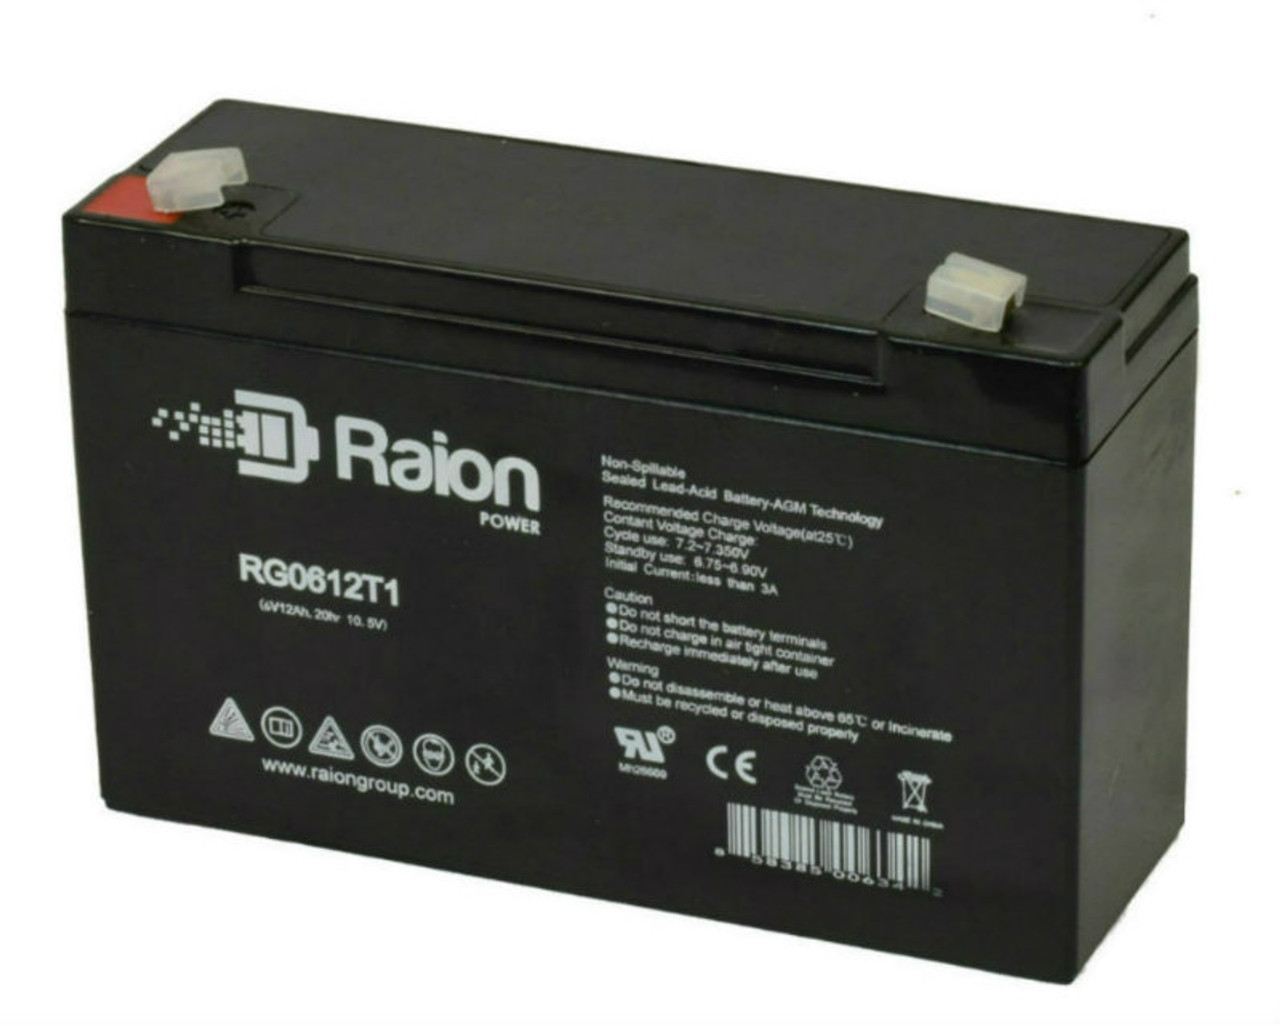 Raion Power RG06120T1 Replacement Emergency Light Battery for Holophane EH6